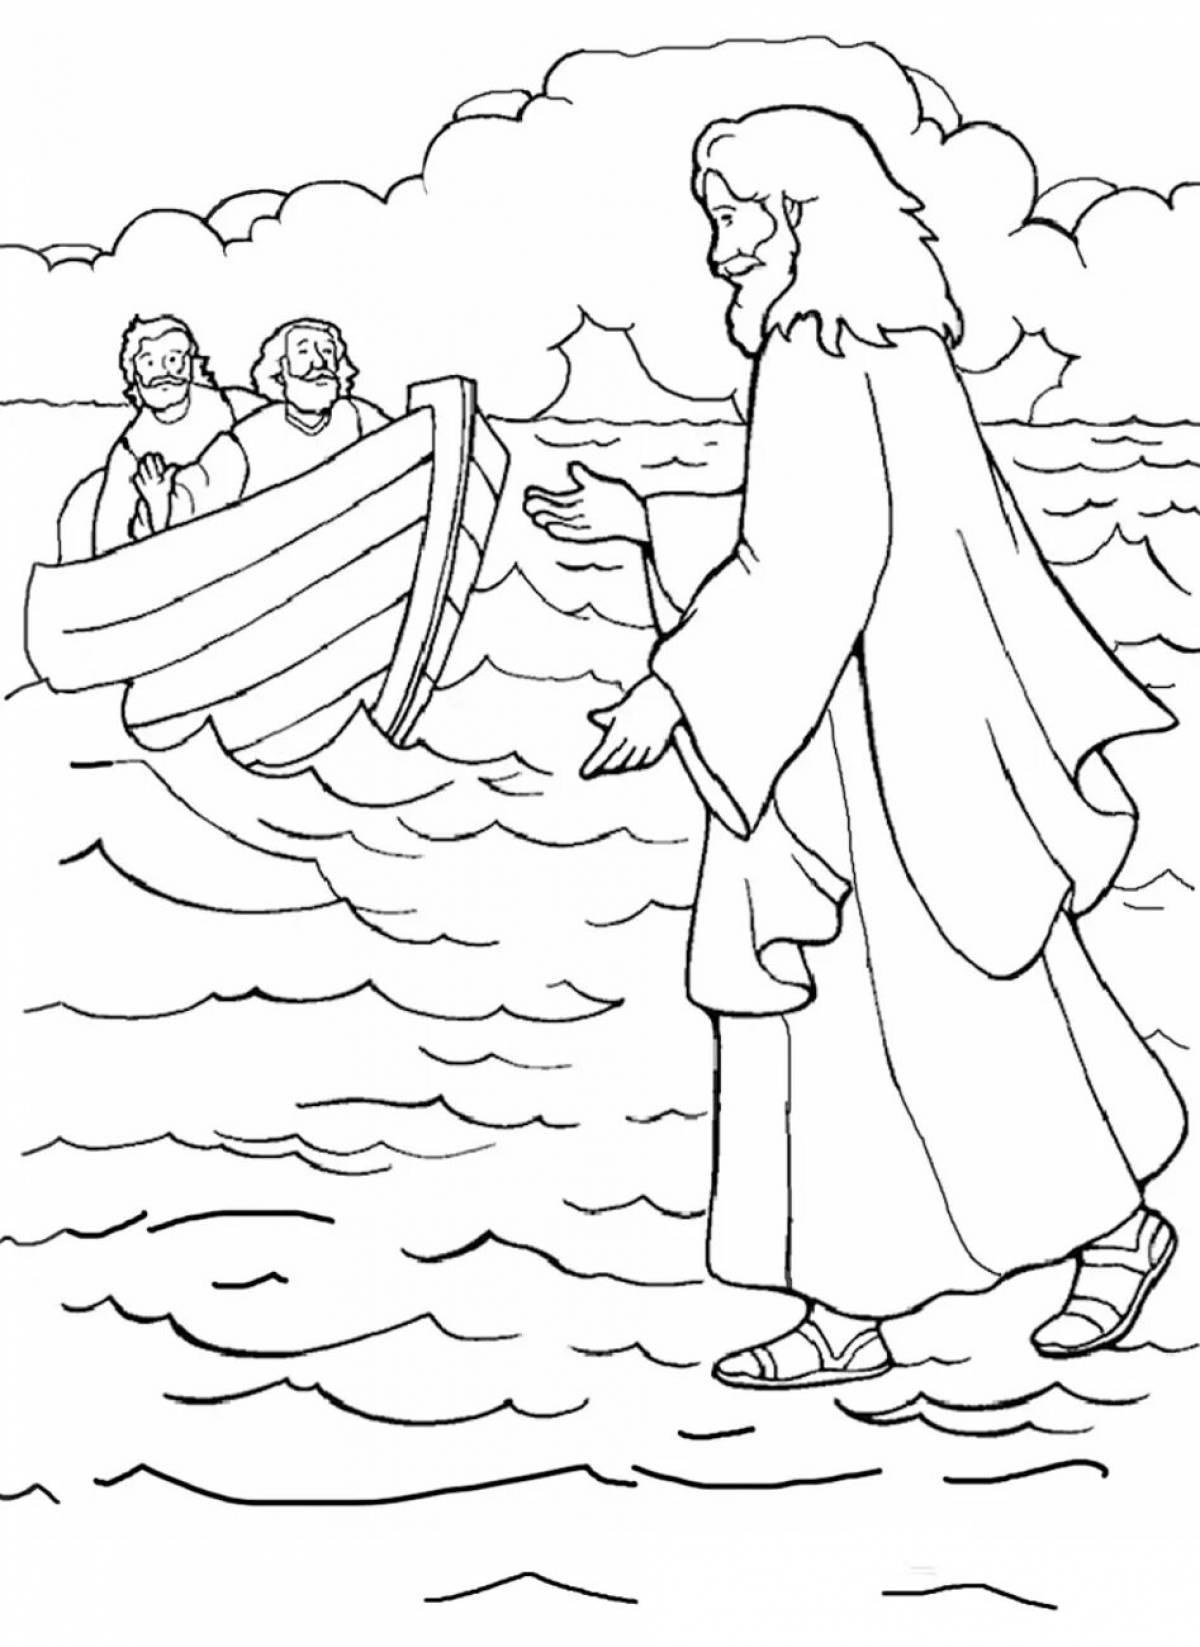 Exciting Christian coloring book for kids